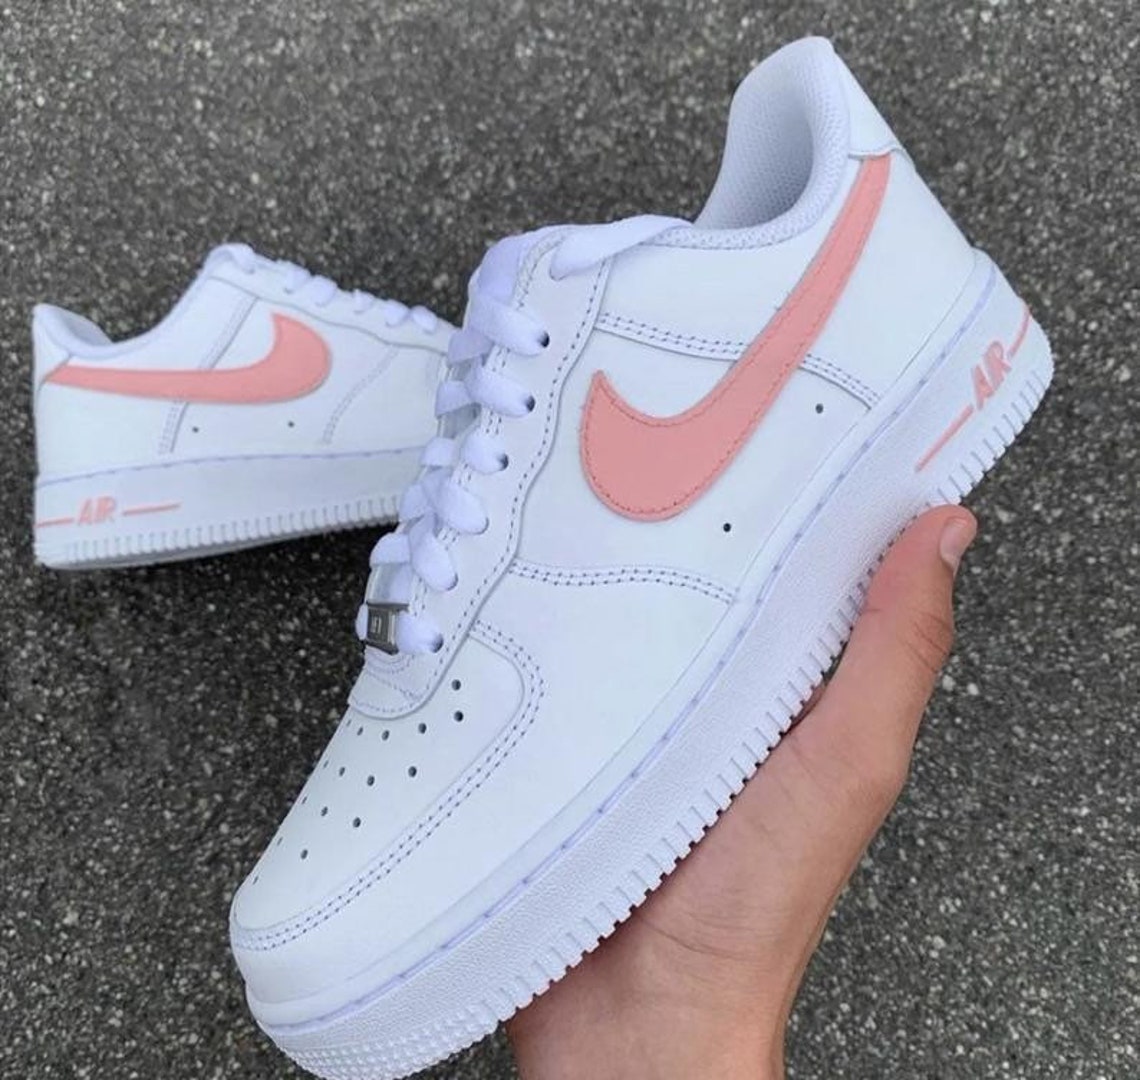 Customized Pink Nike Air Forces | Etsy